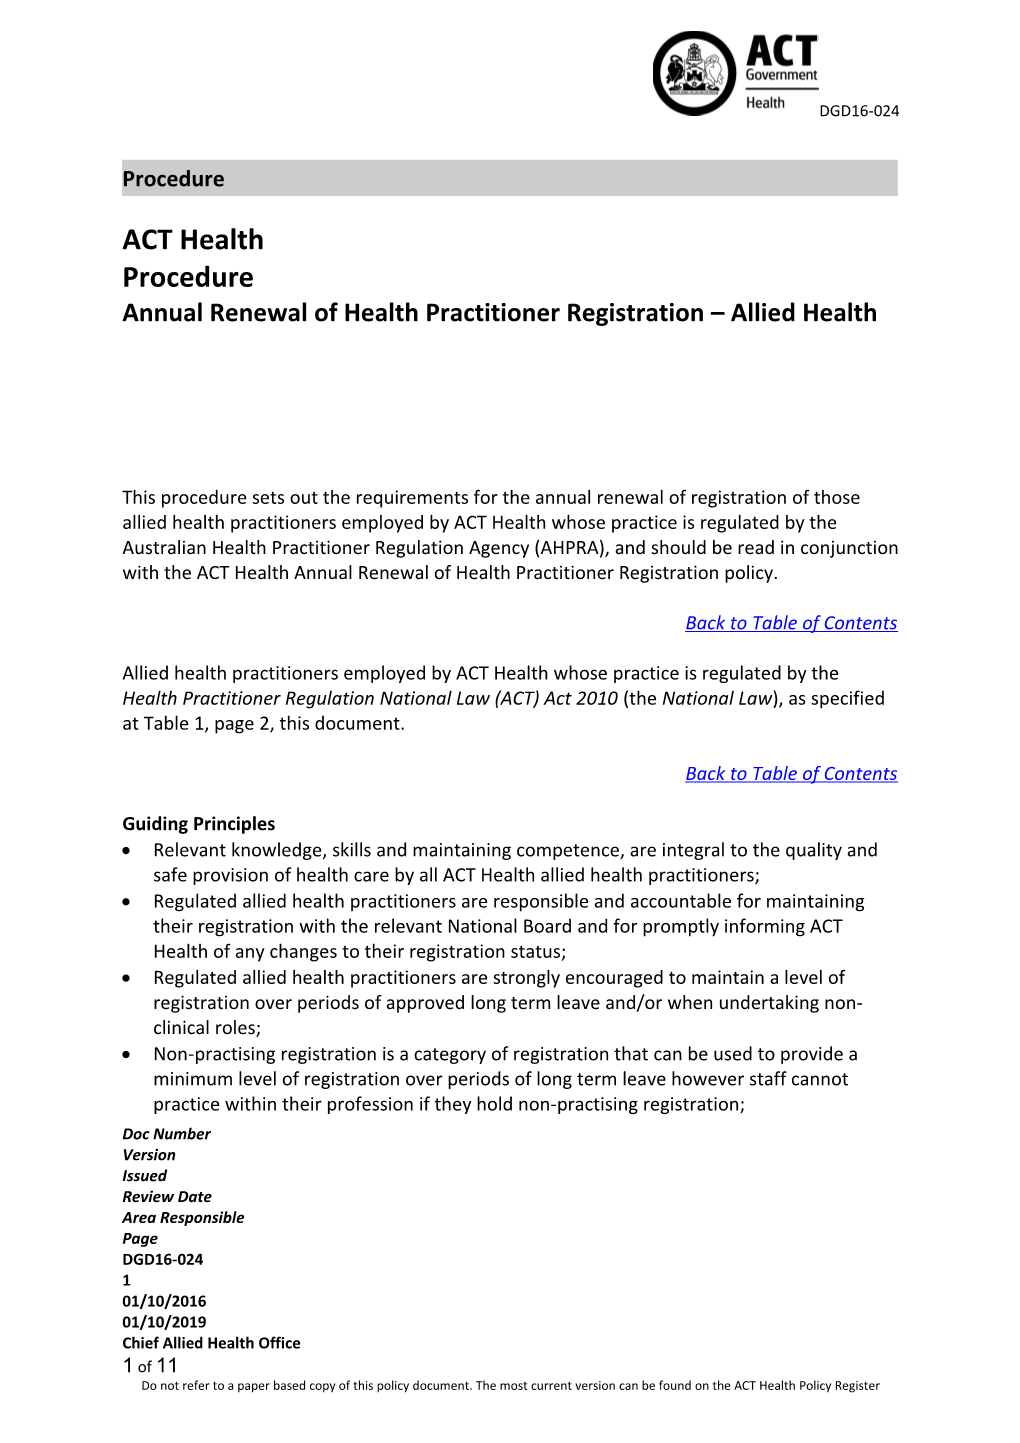 Annual Renewal of Health Practitioner Registration-Allied Health